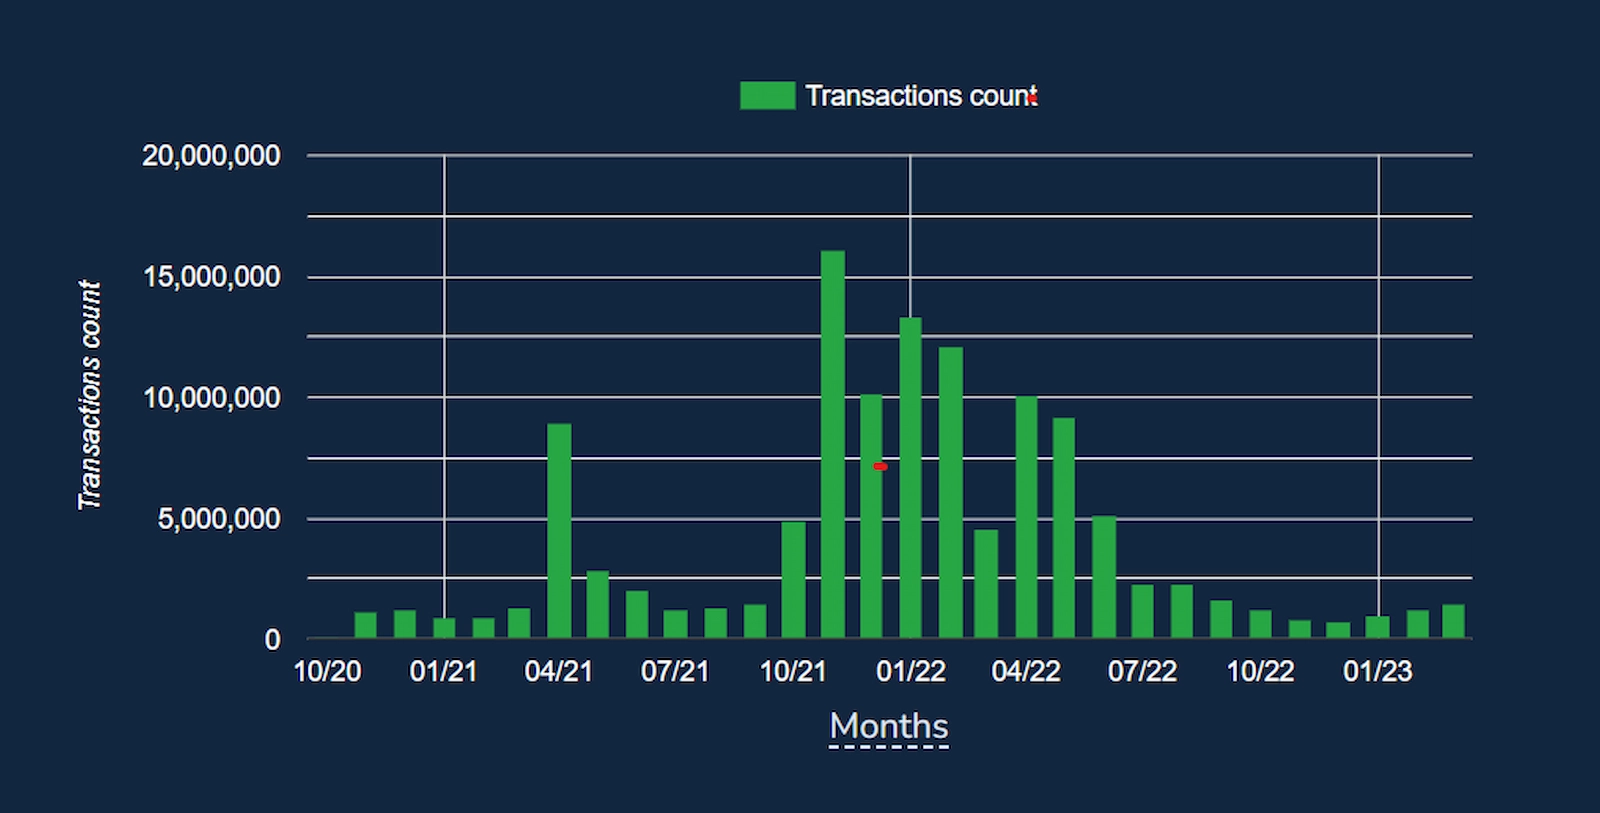 The Conflux transaction count rose over the past few months